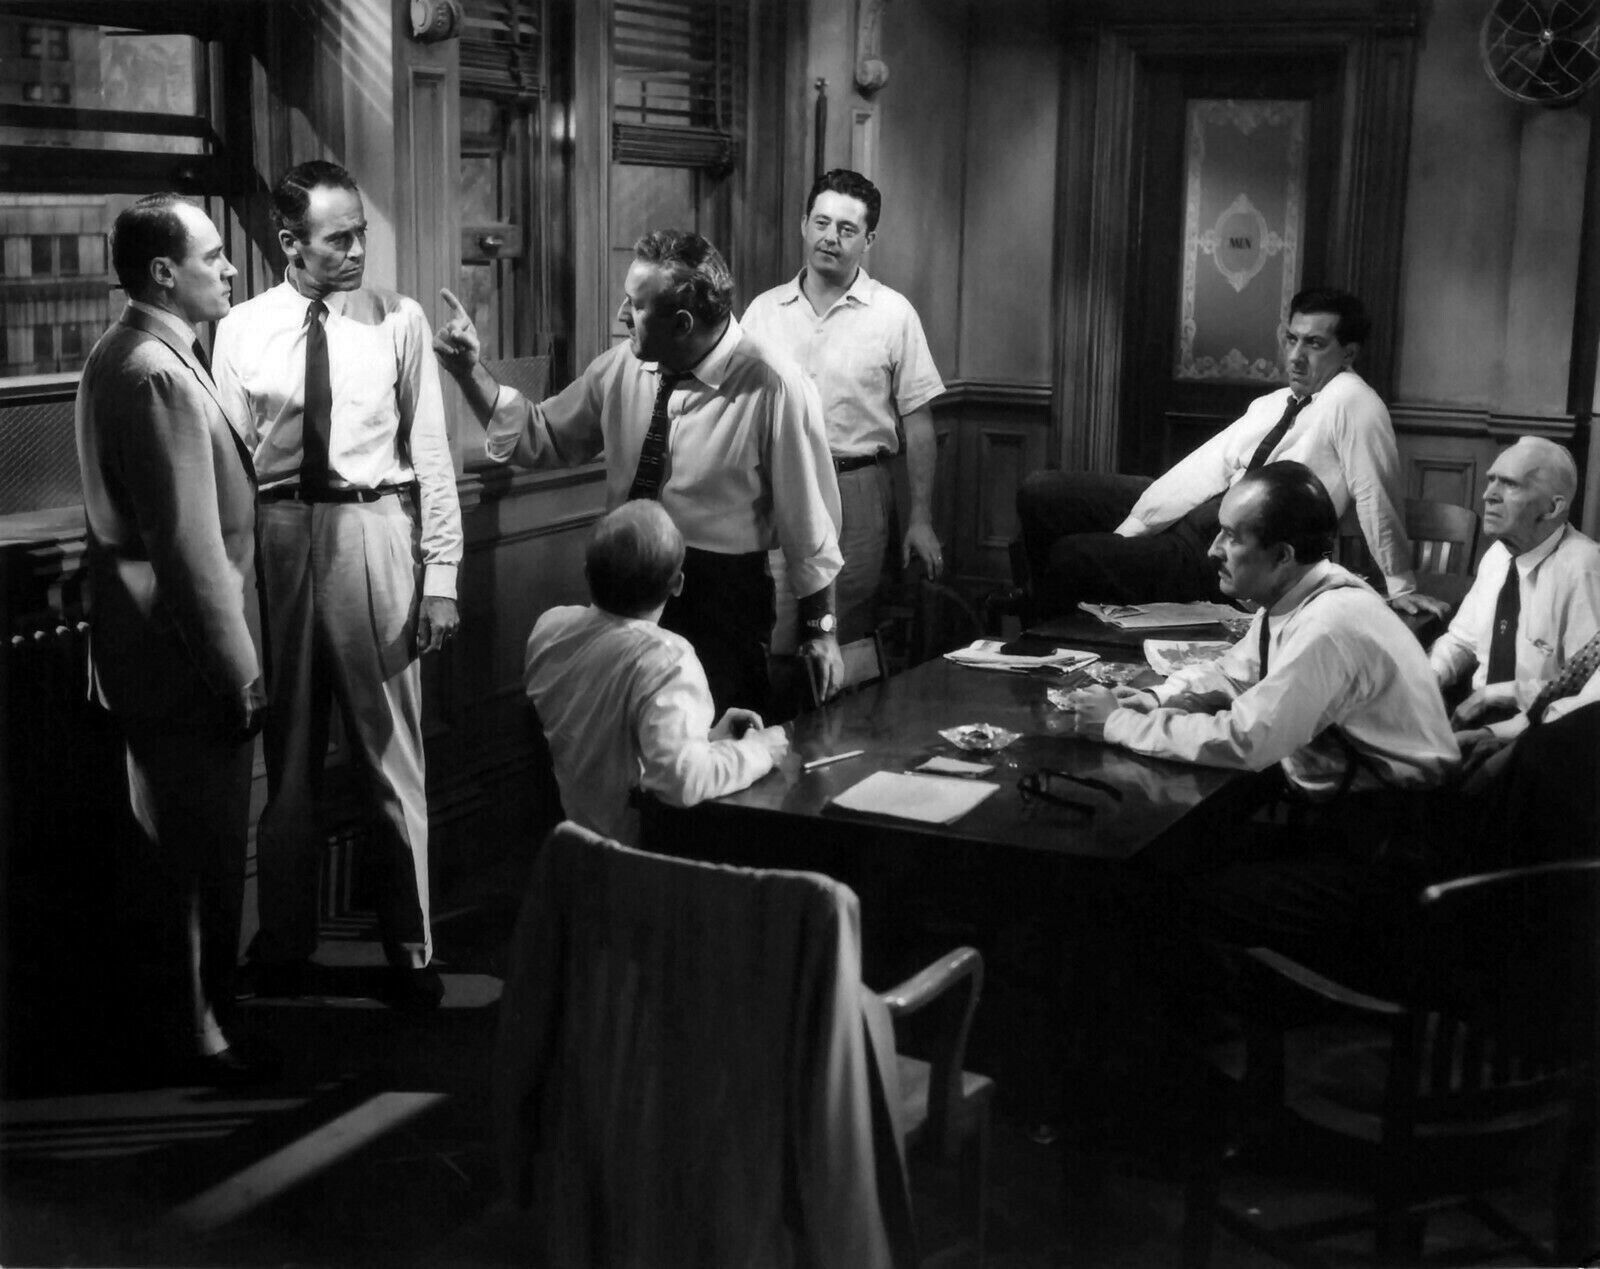 12 ANGRY MEN HENRY FONDA 8X10 GLOSSY PHOTO PICTURE IMAGE #2